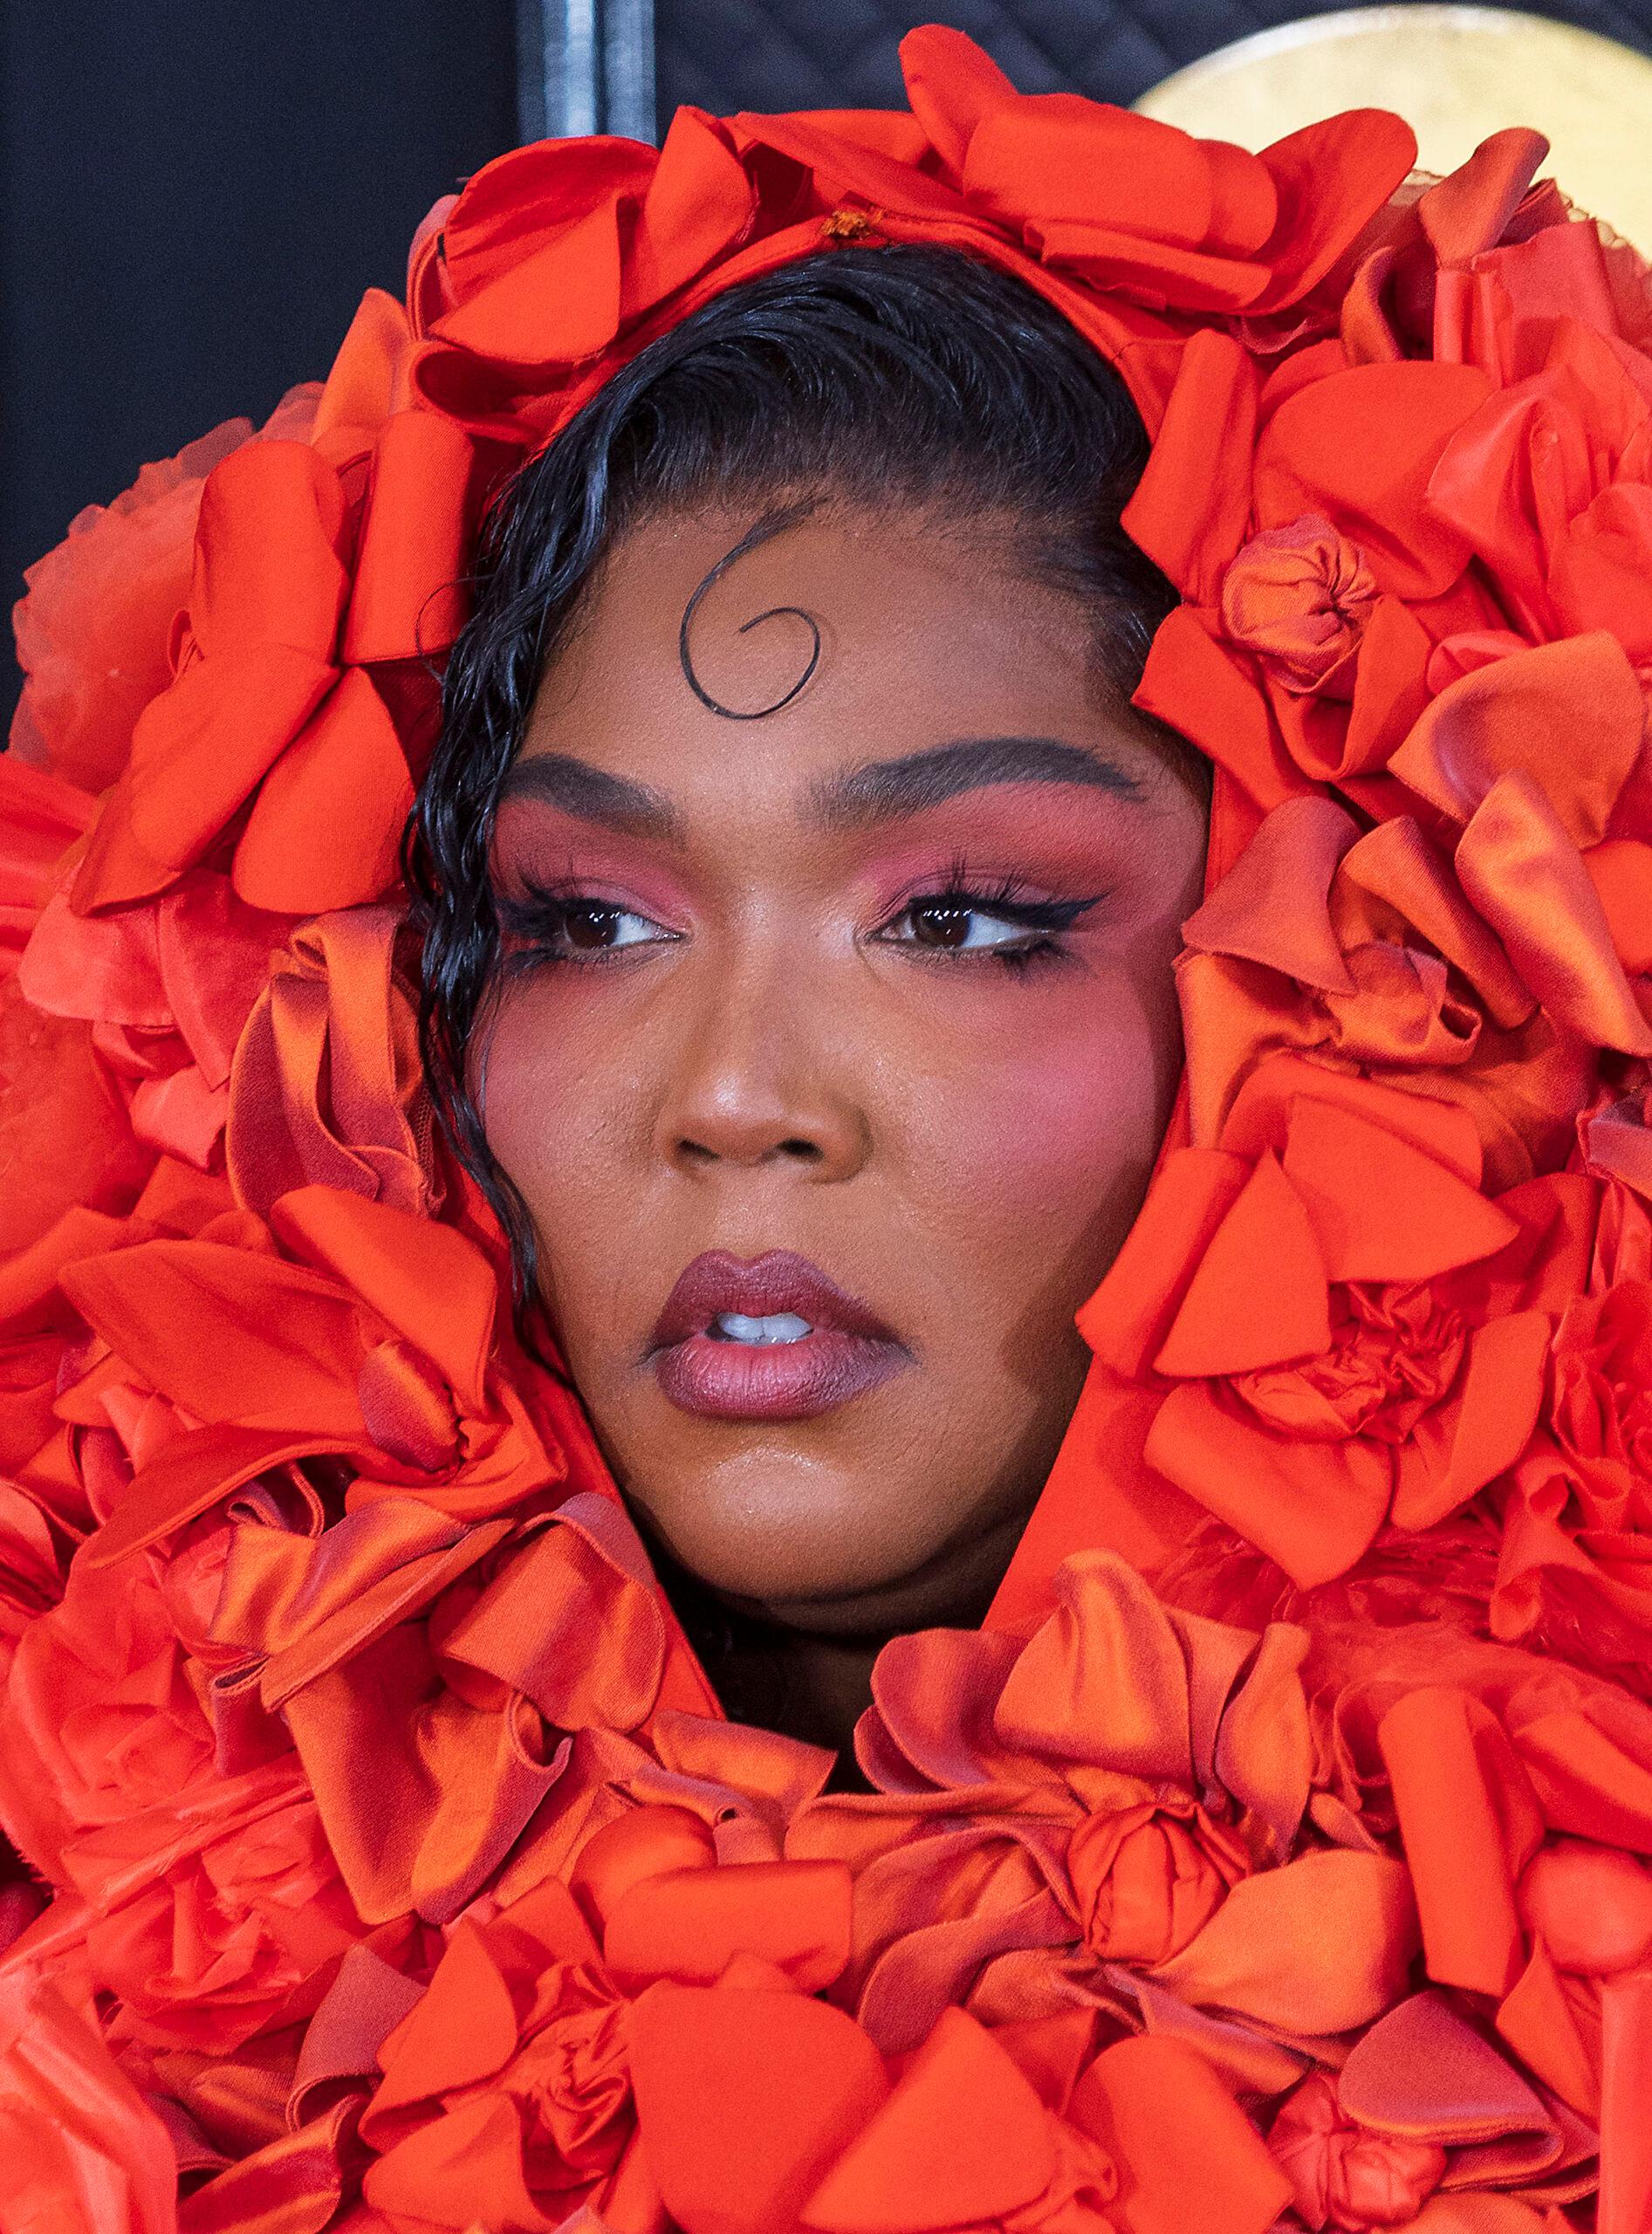 Lizzo at the 65th Grammy Awards